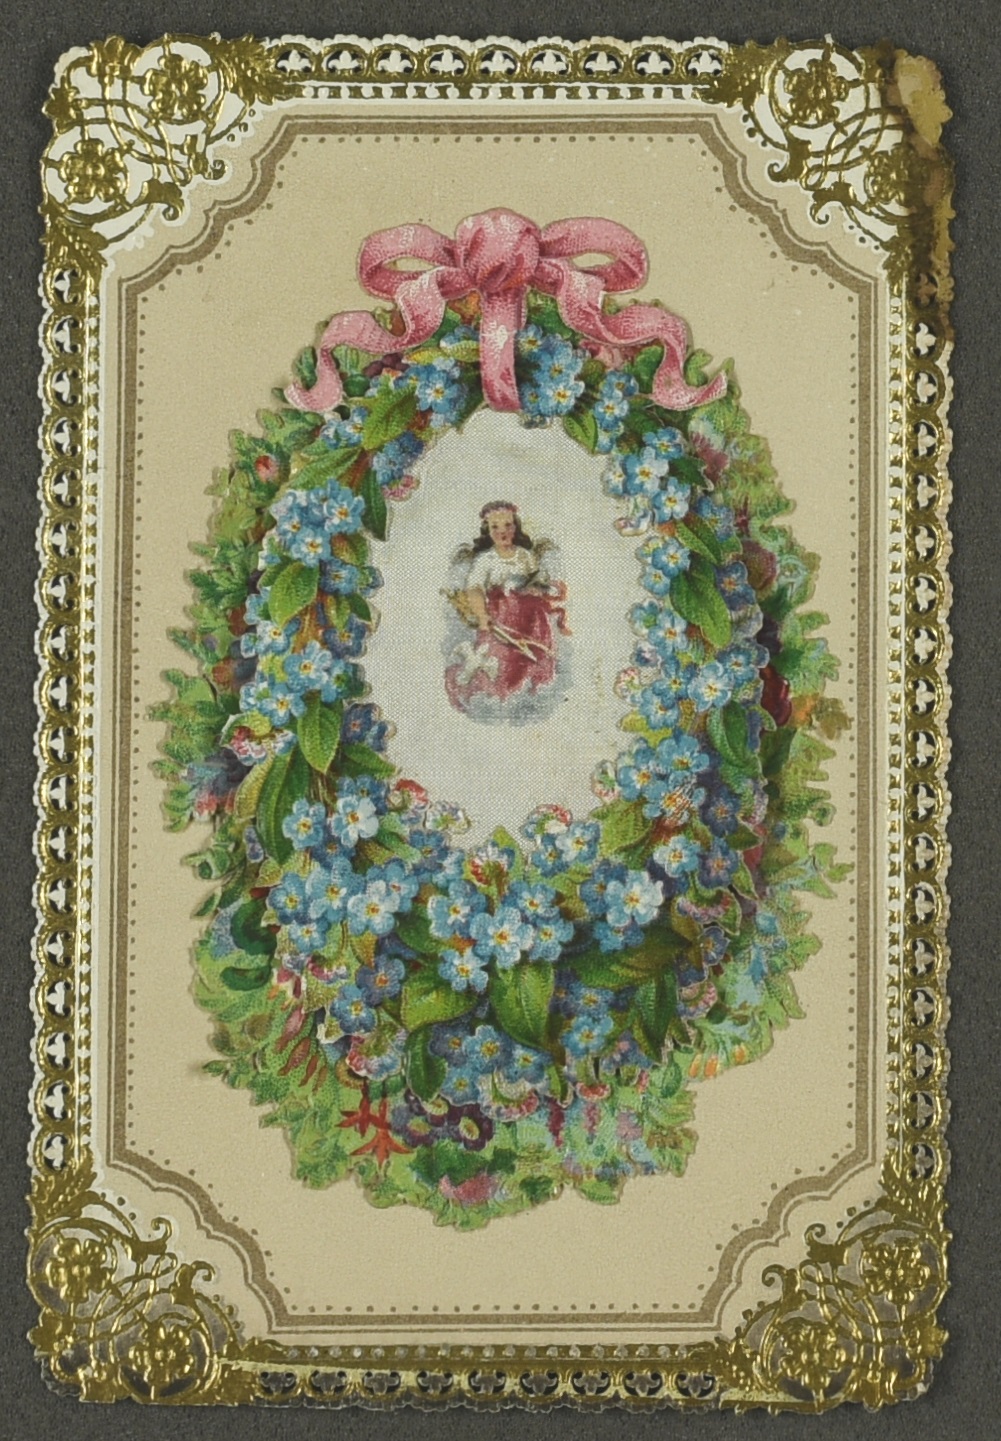 Christmas greetings card depicting a floral wreath and angel